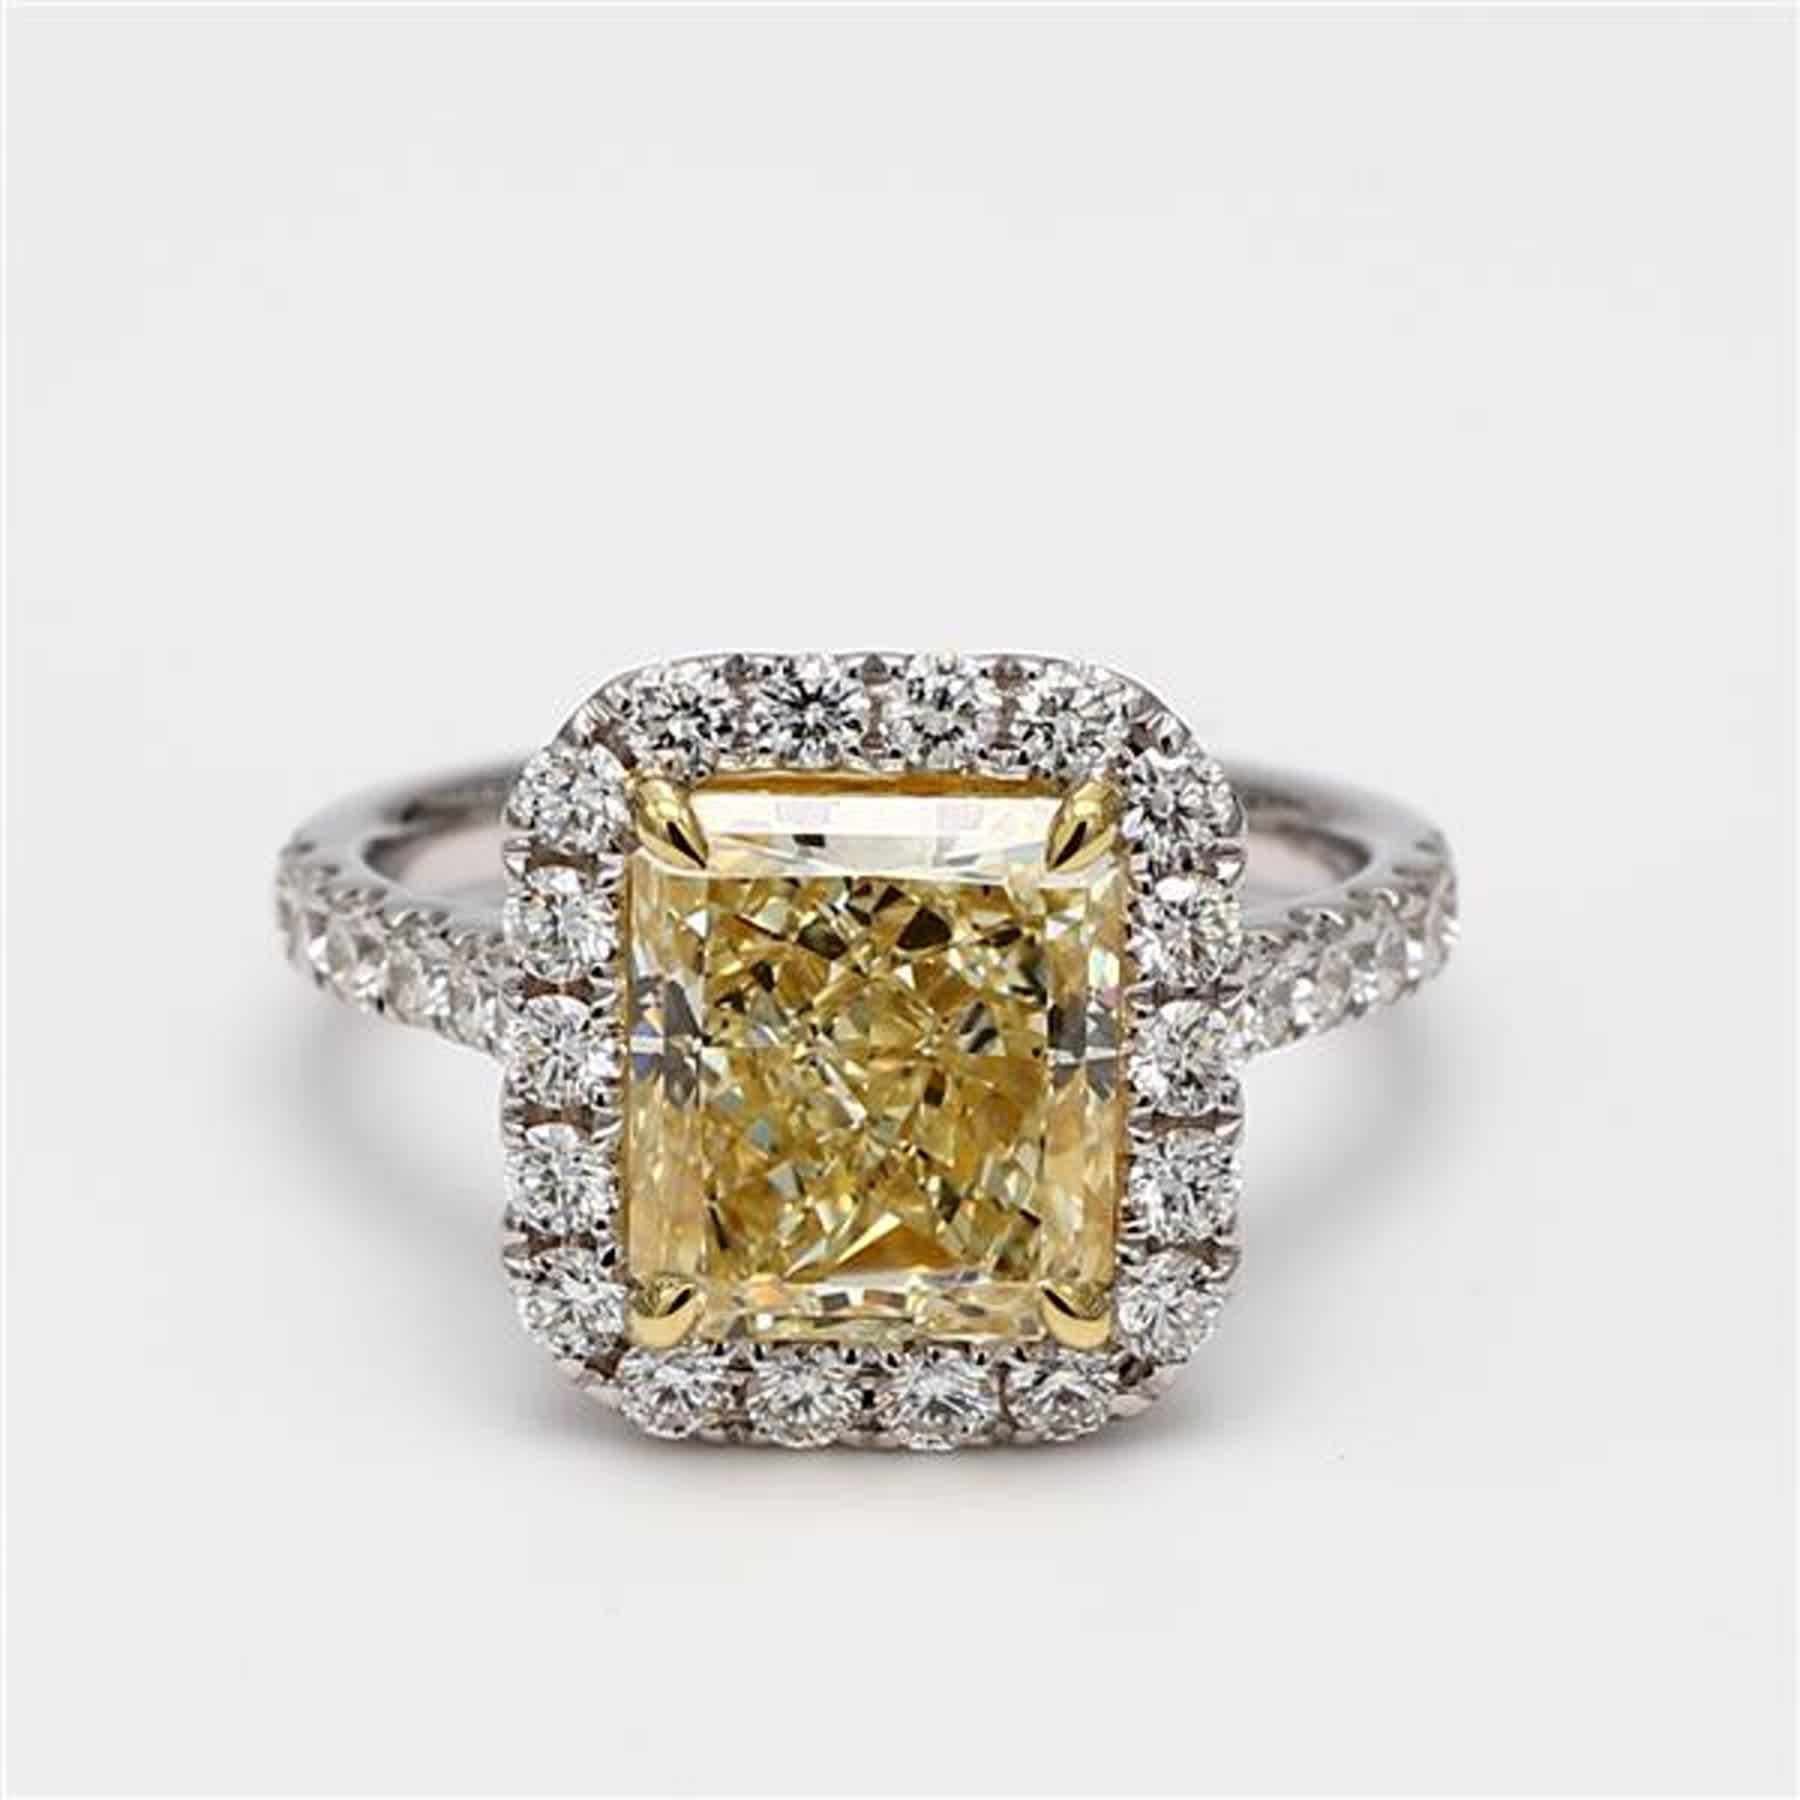 RareGemWorld's classic diamond ring. Mounted in a beautiful 18K Yellow and White Gold setting with a natural radiant cut yellow diamond. The yellow diamond is surrounded by round natural white diamond melee. This ring is guaranteed to impress and